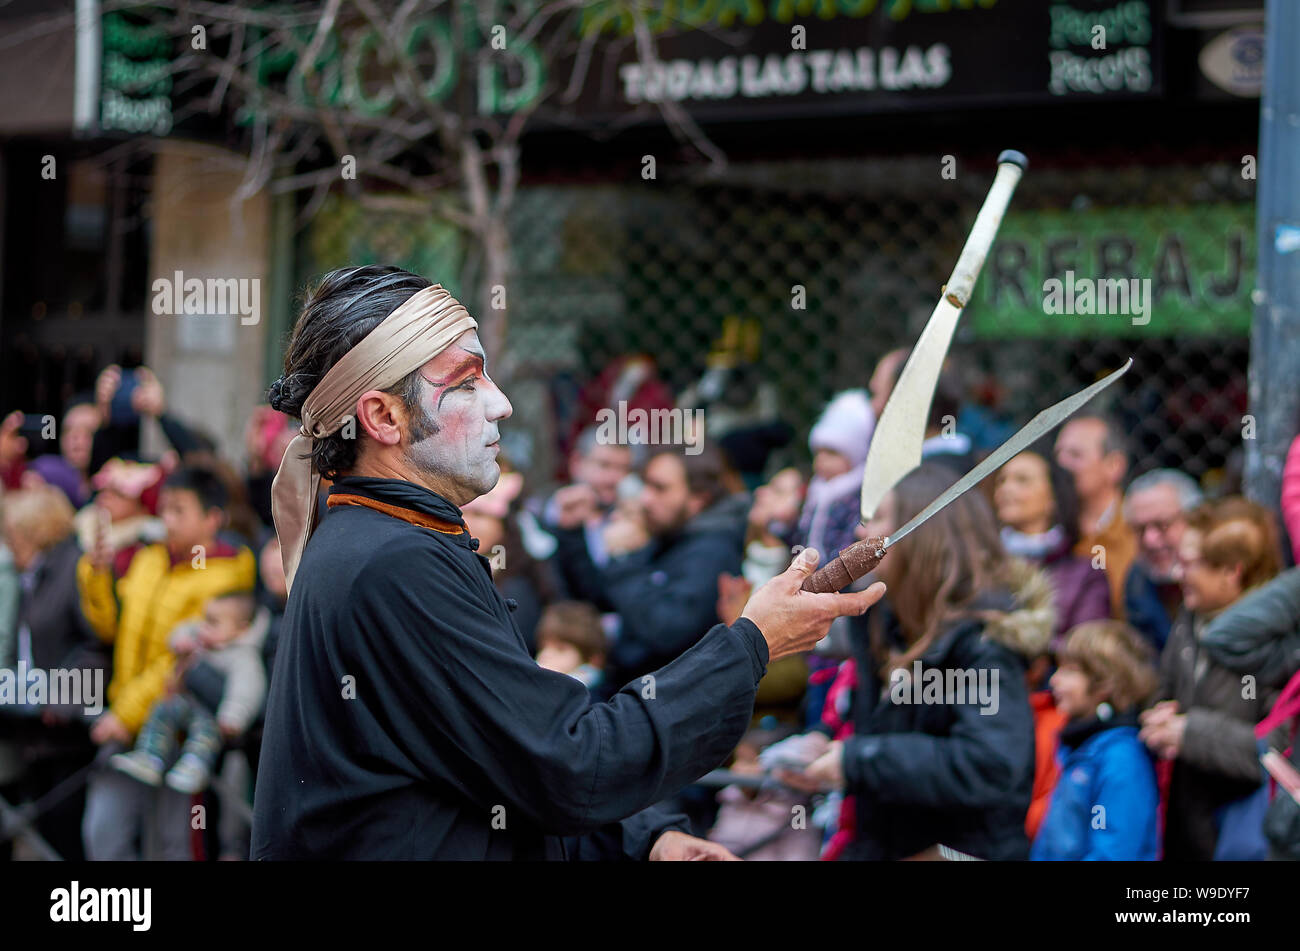 PARADE IN THE DISTRICT OF USERA IN MADRID TO CELEBRATE CHINESE NEW YEAR Stock Photo